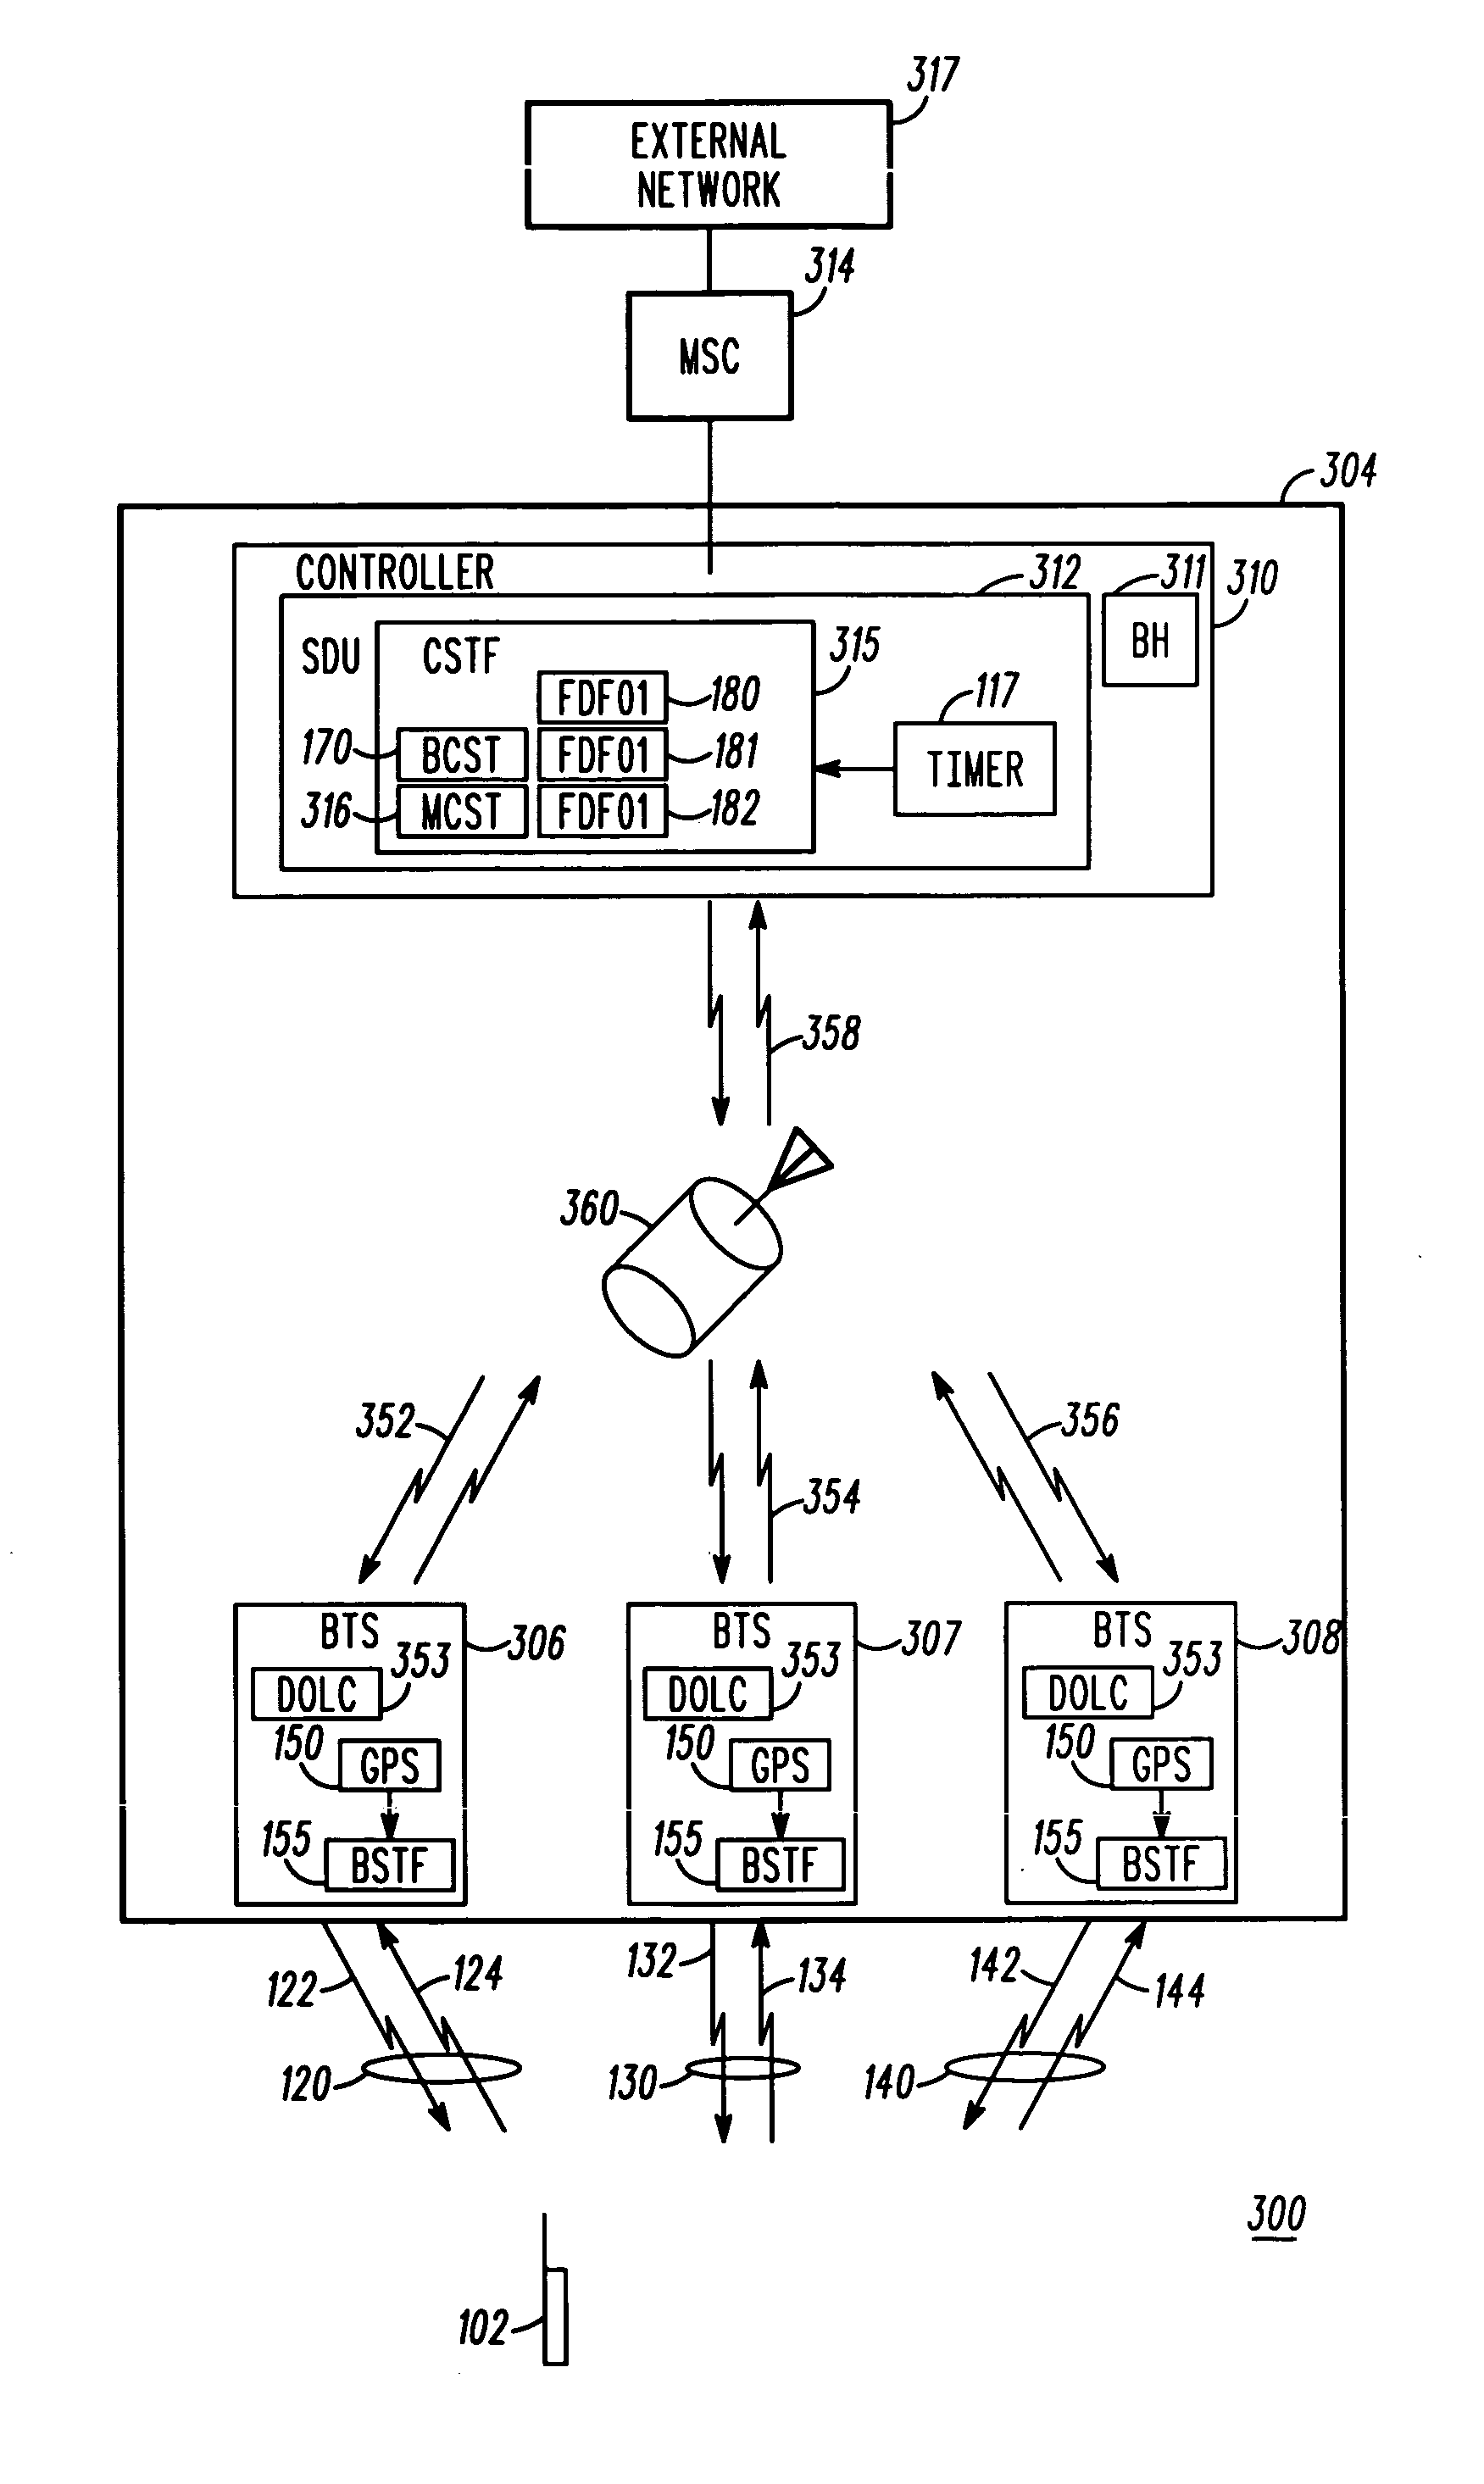 Timing compensation method and means for a terrestrial wireless communication system having satelite backhaul link